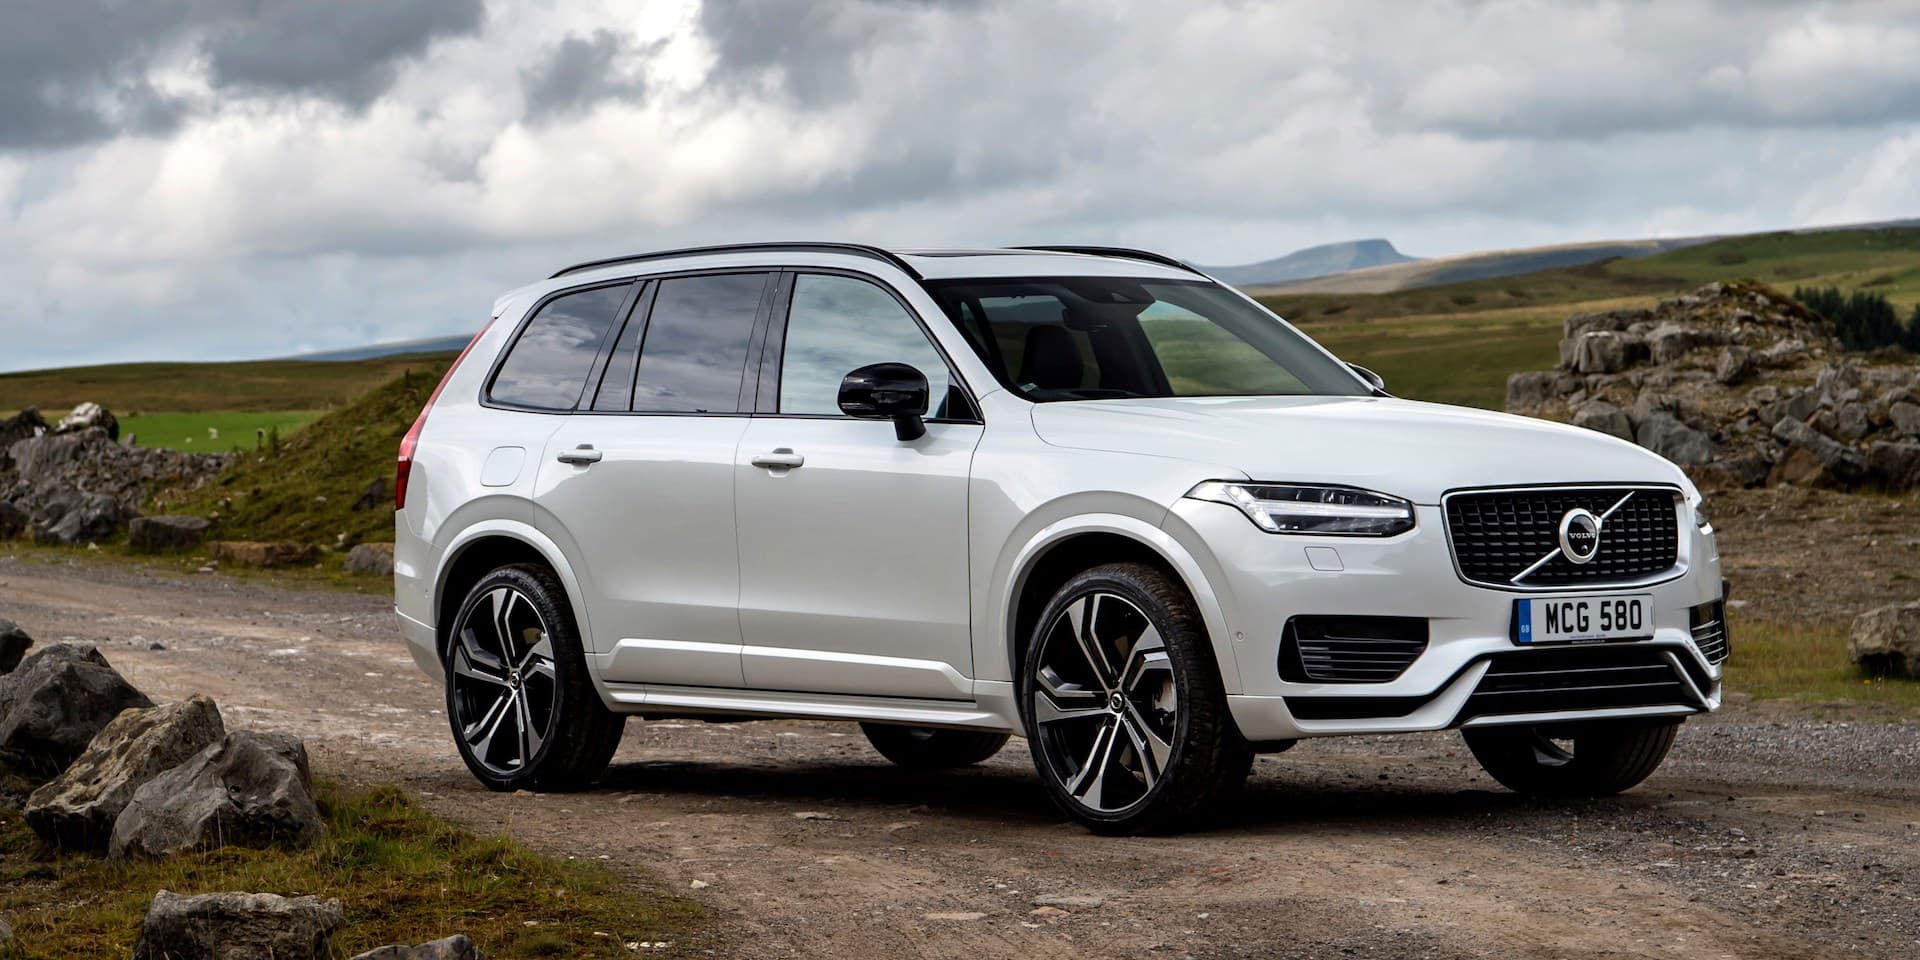 Top ten most hi-tech cars and SUVs everyone can afford - 2015 Volvo XC90.